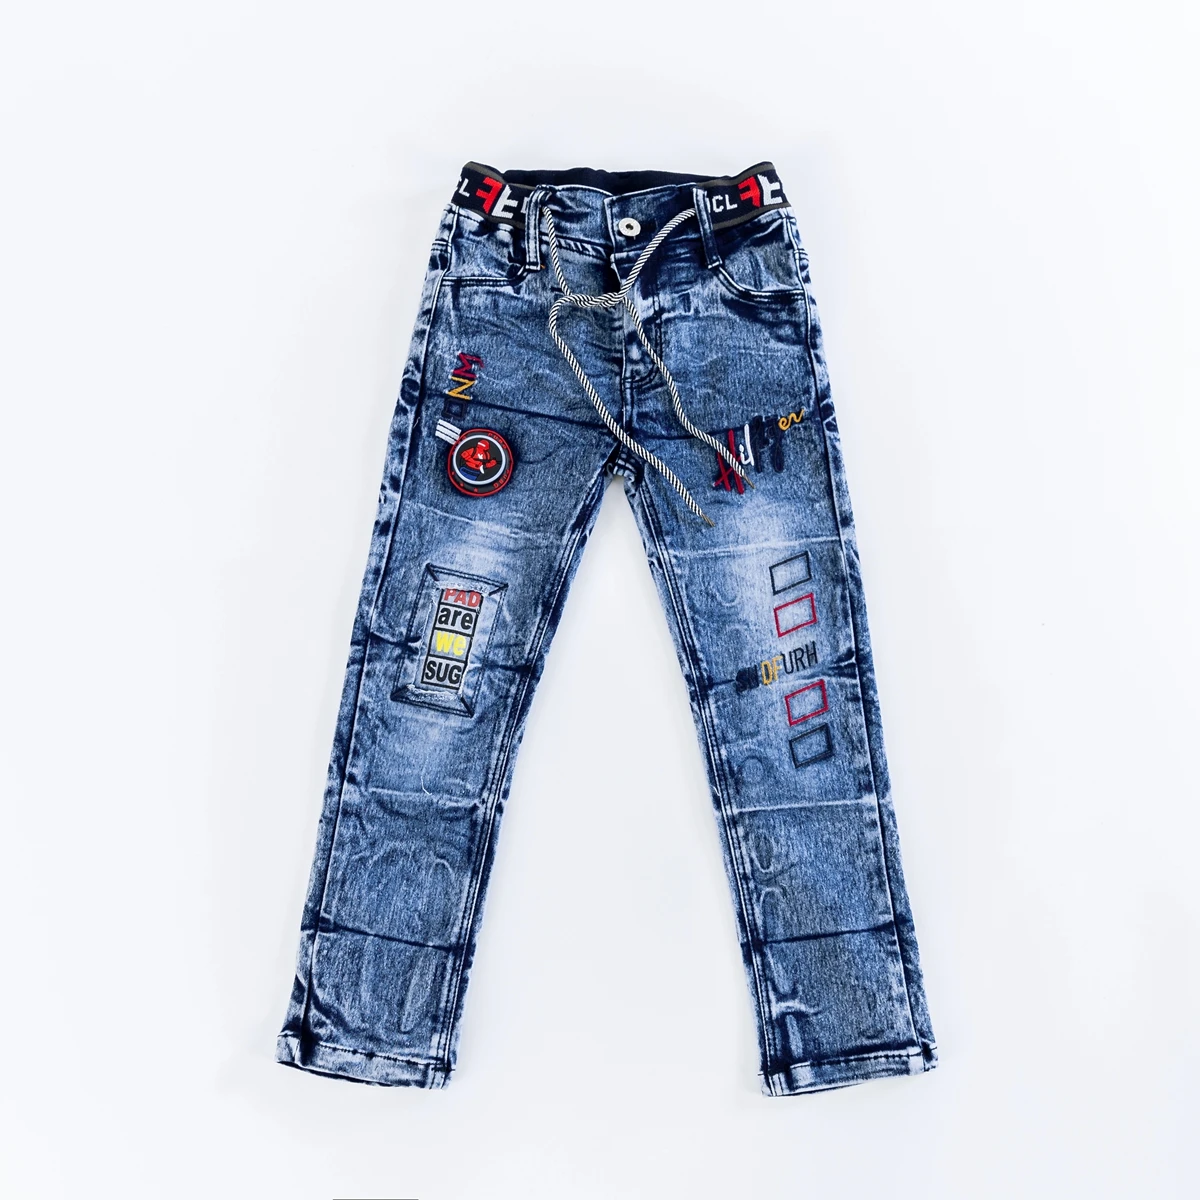 Moncler Kids Boys Trousers: Stylish & Comfy for Kids